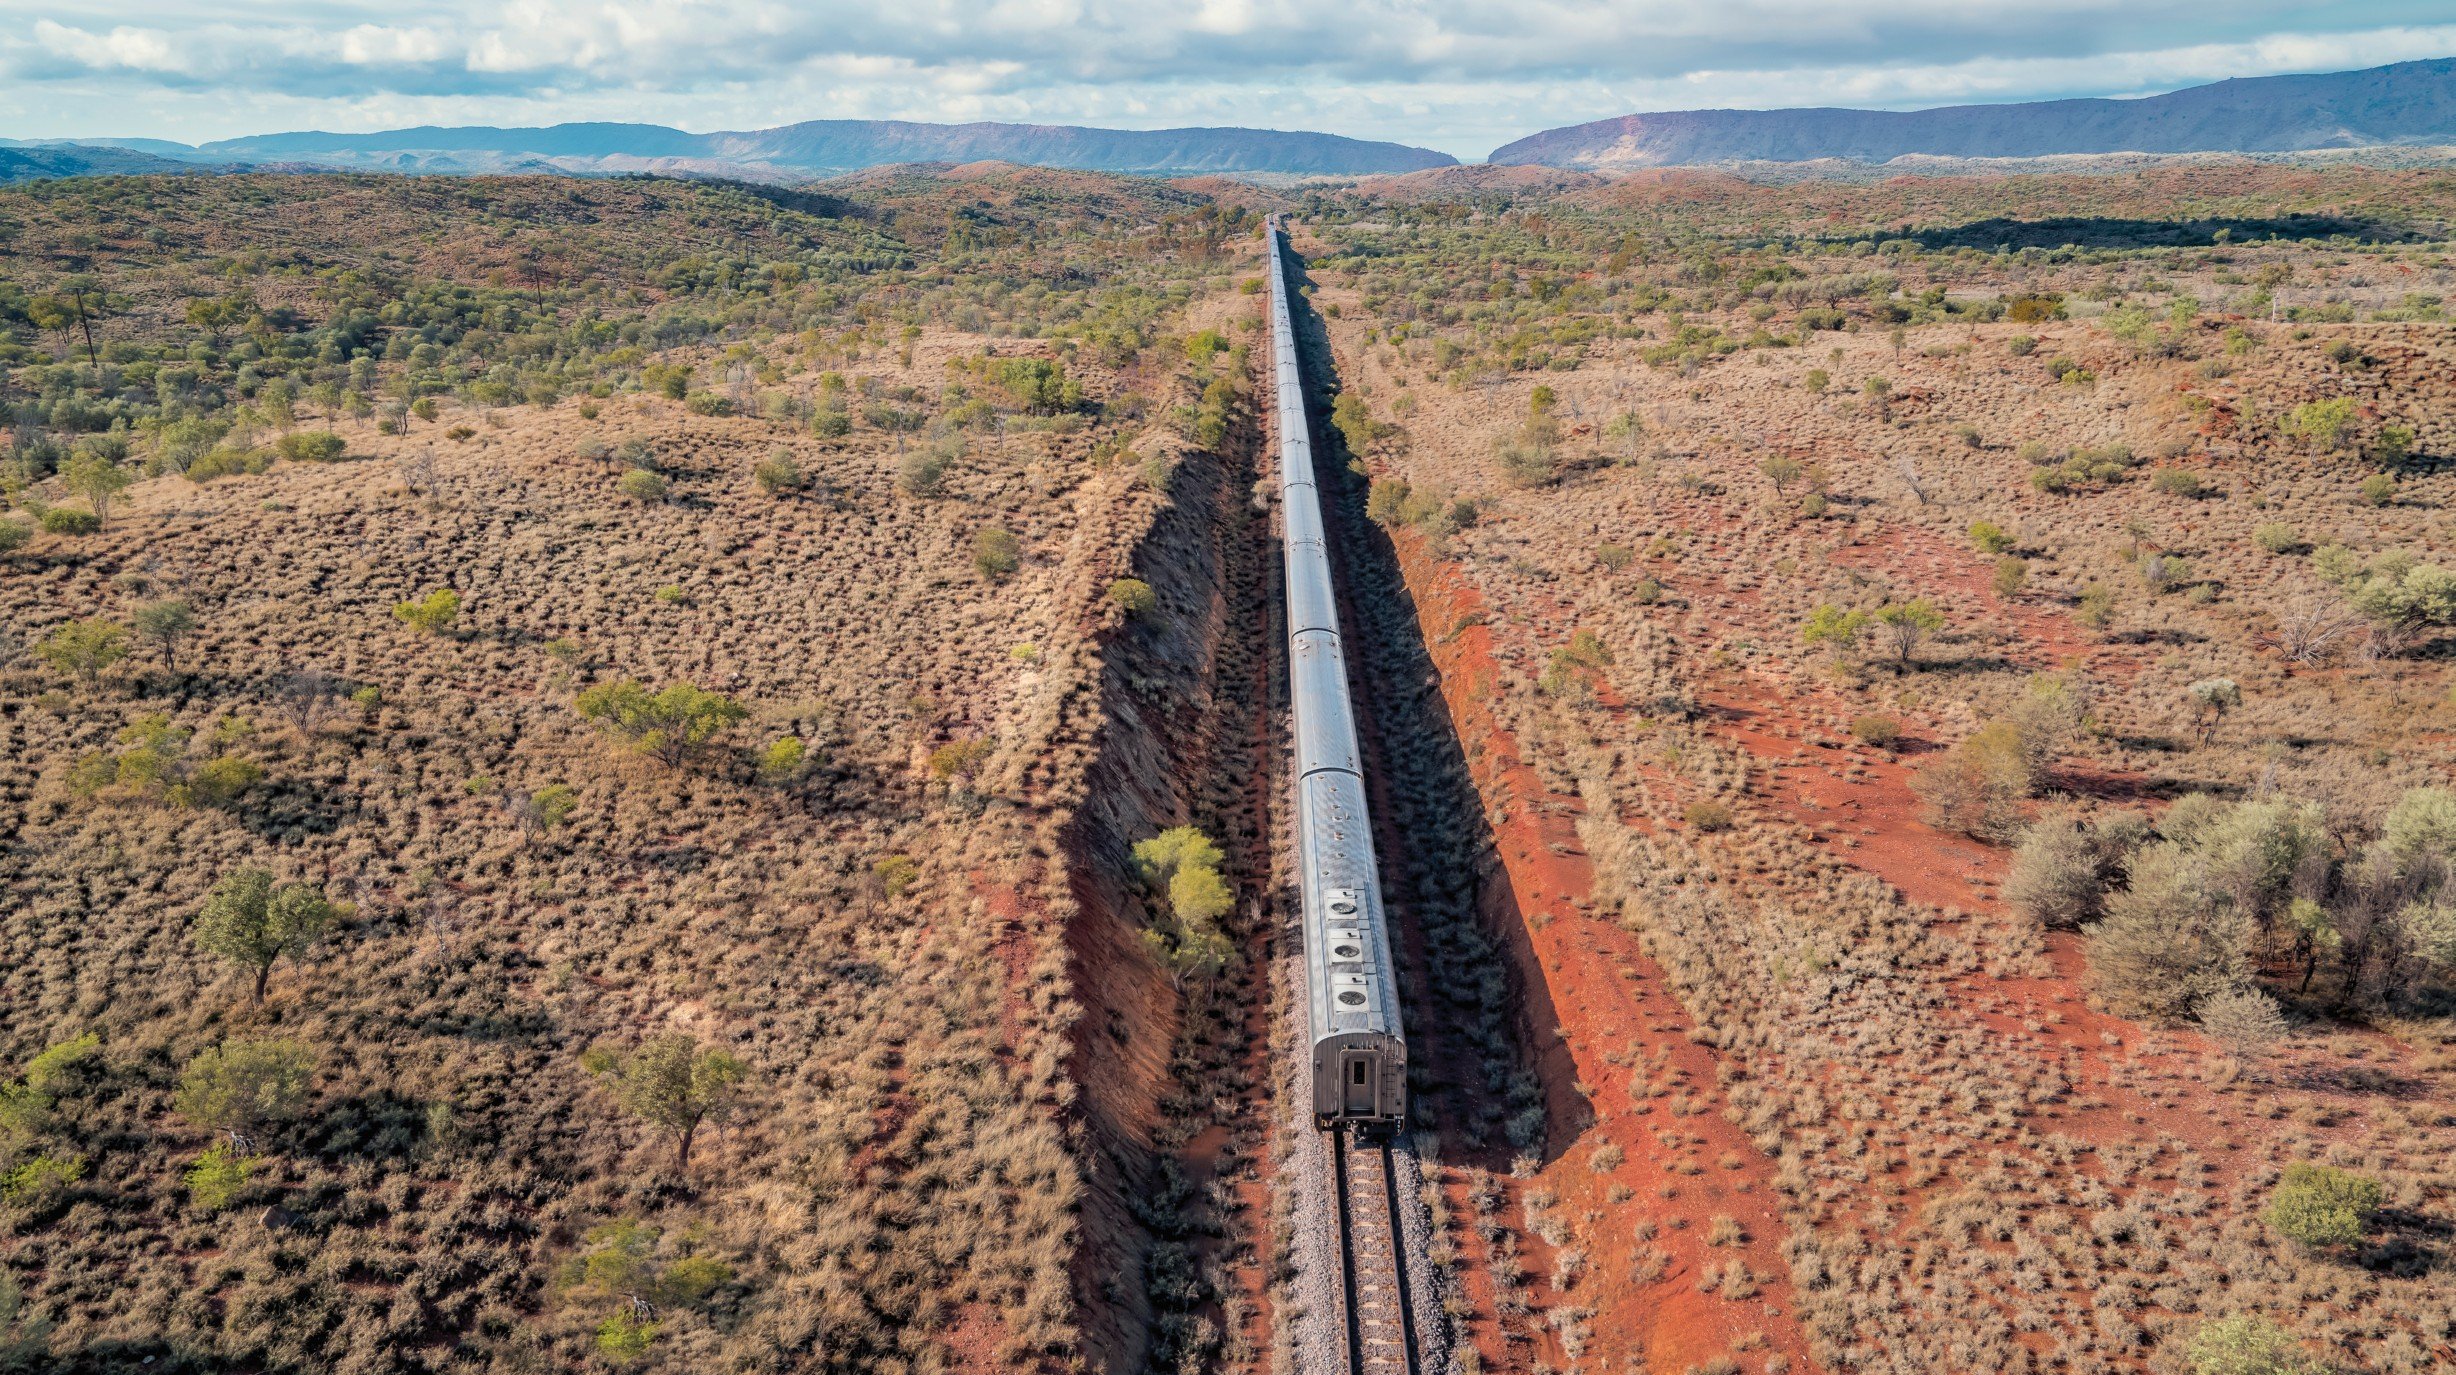 The Ghan Heading south to Alice Springs. The Gap and the MacDonnell Ranges in the background